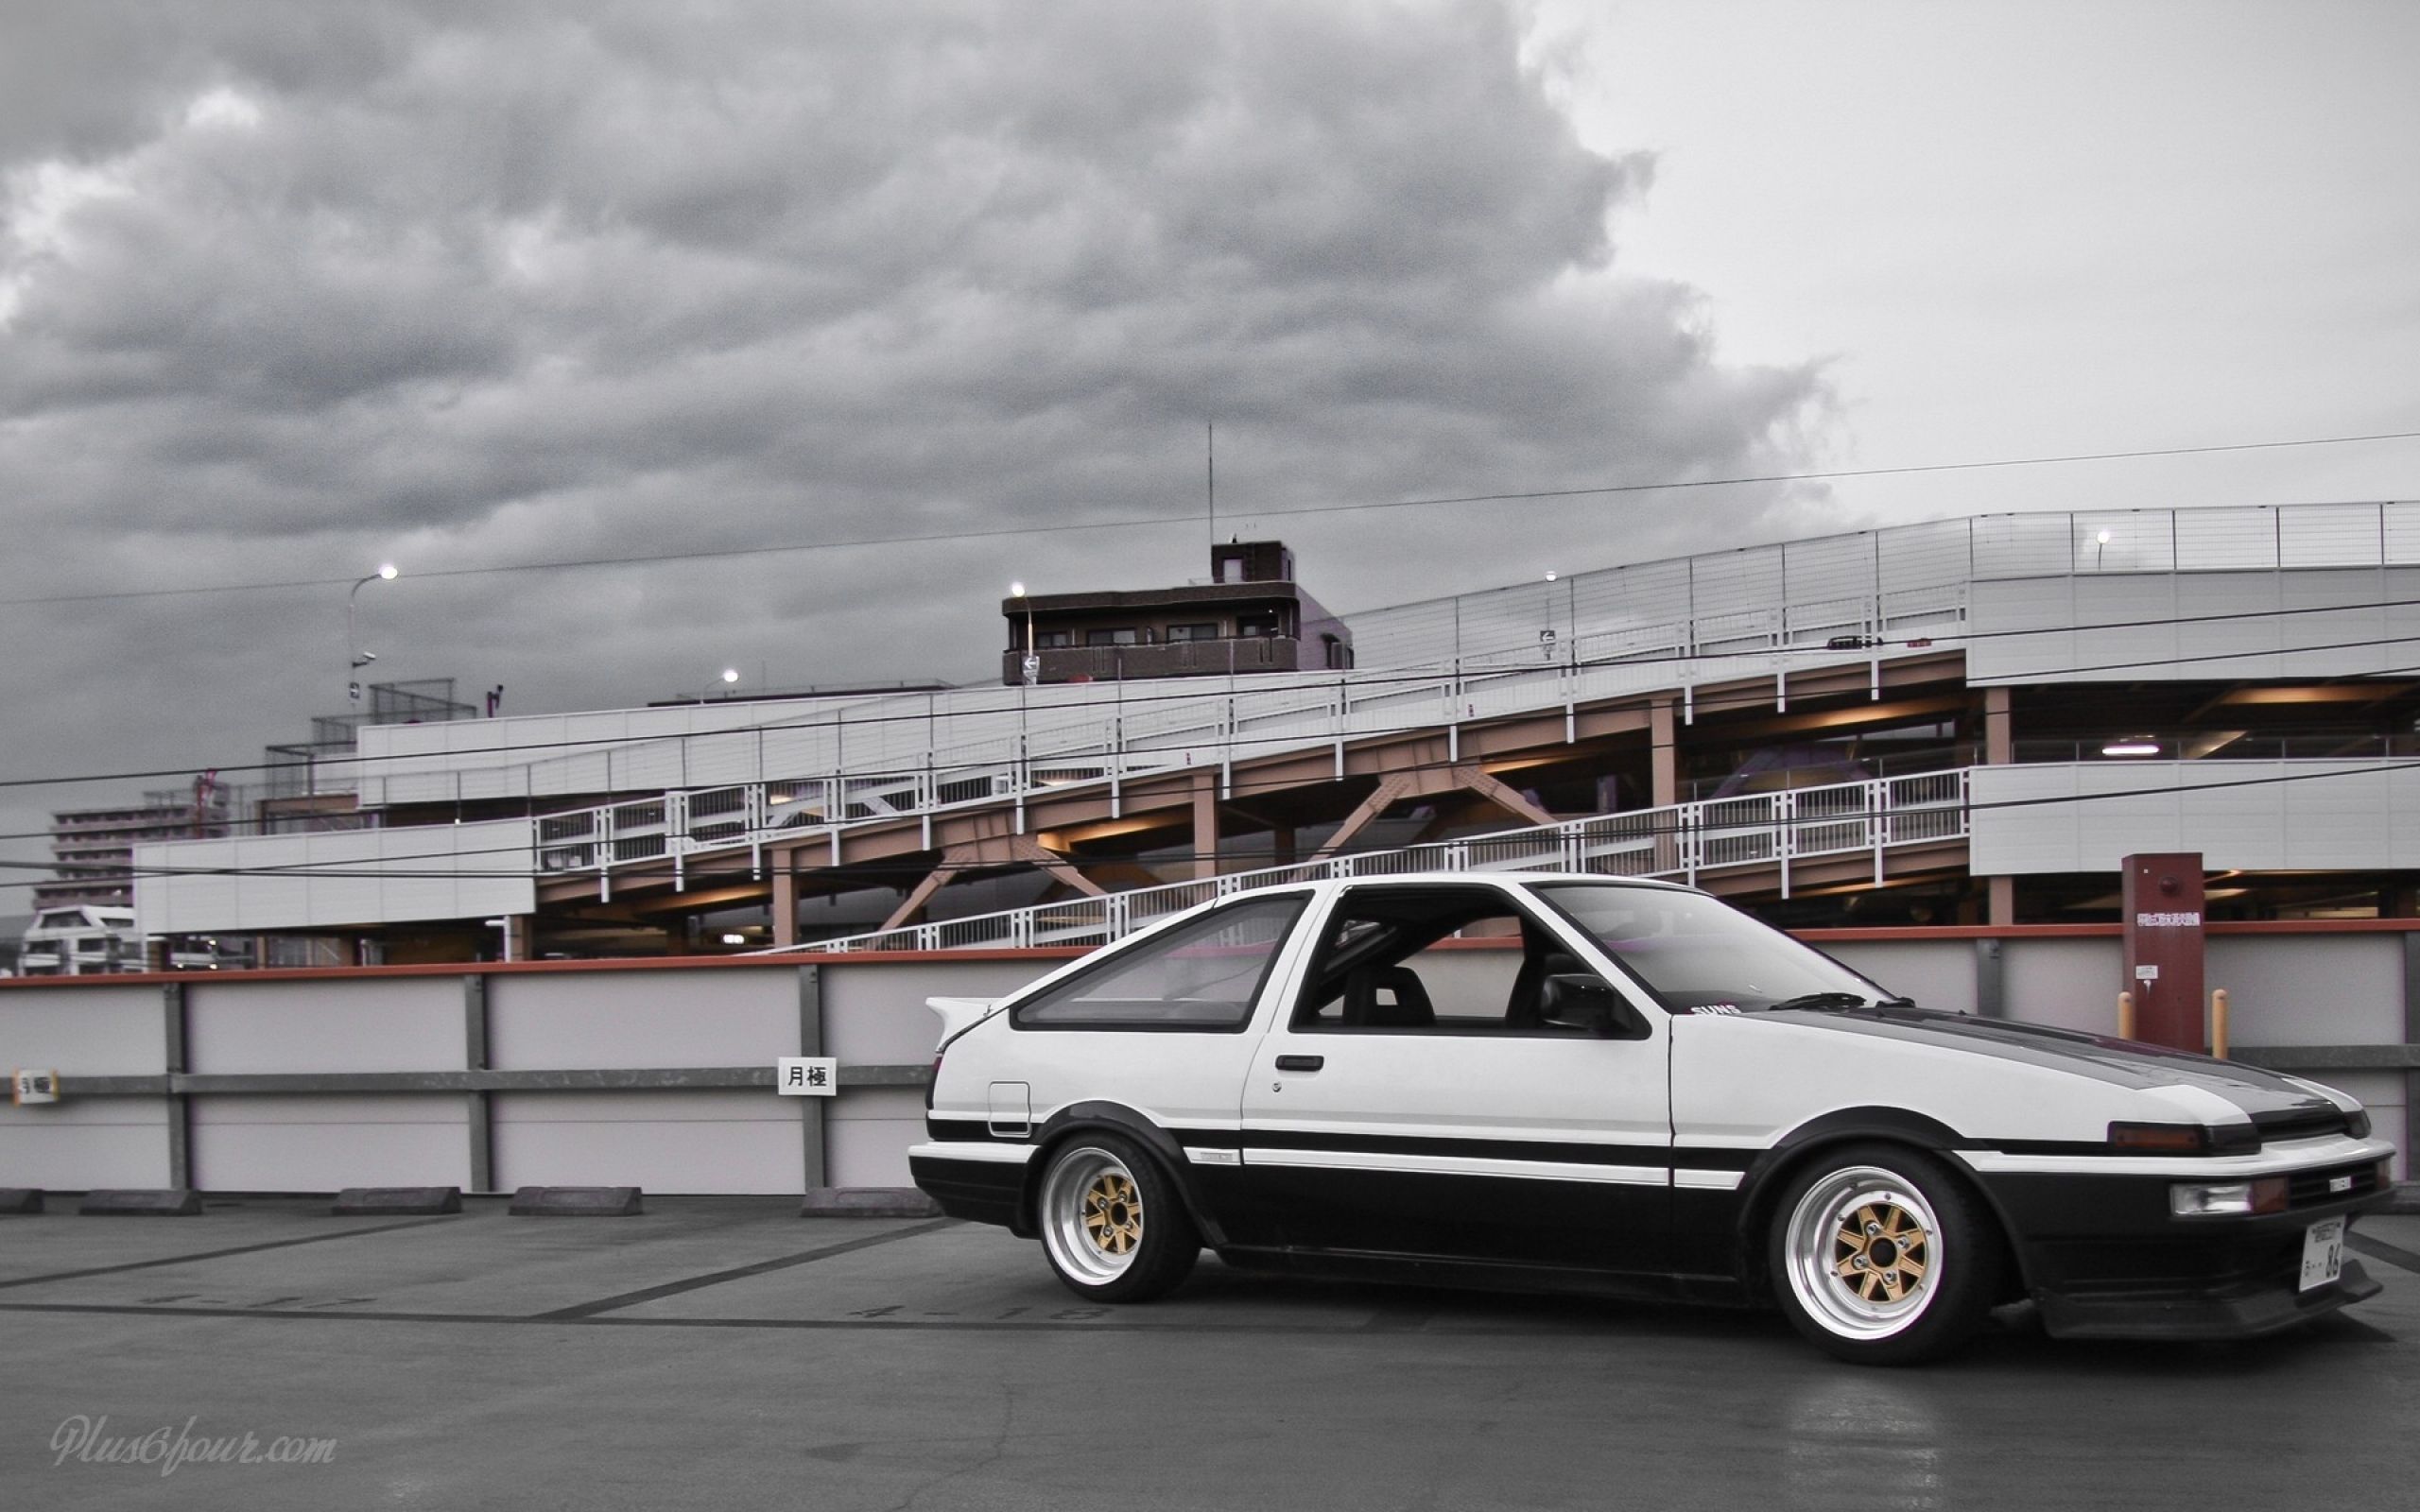 A car parked on the side of an overpass - Toyota AE86